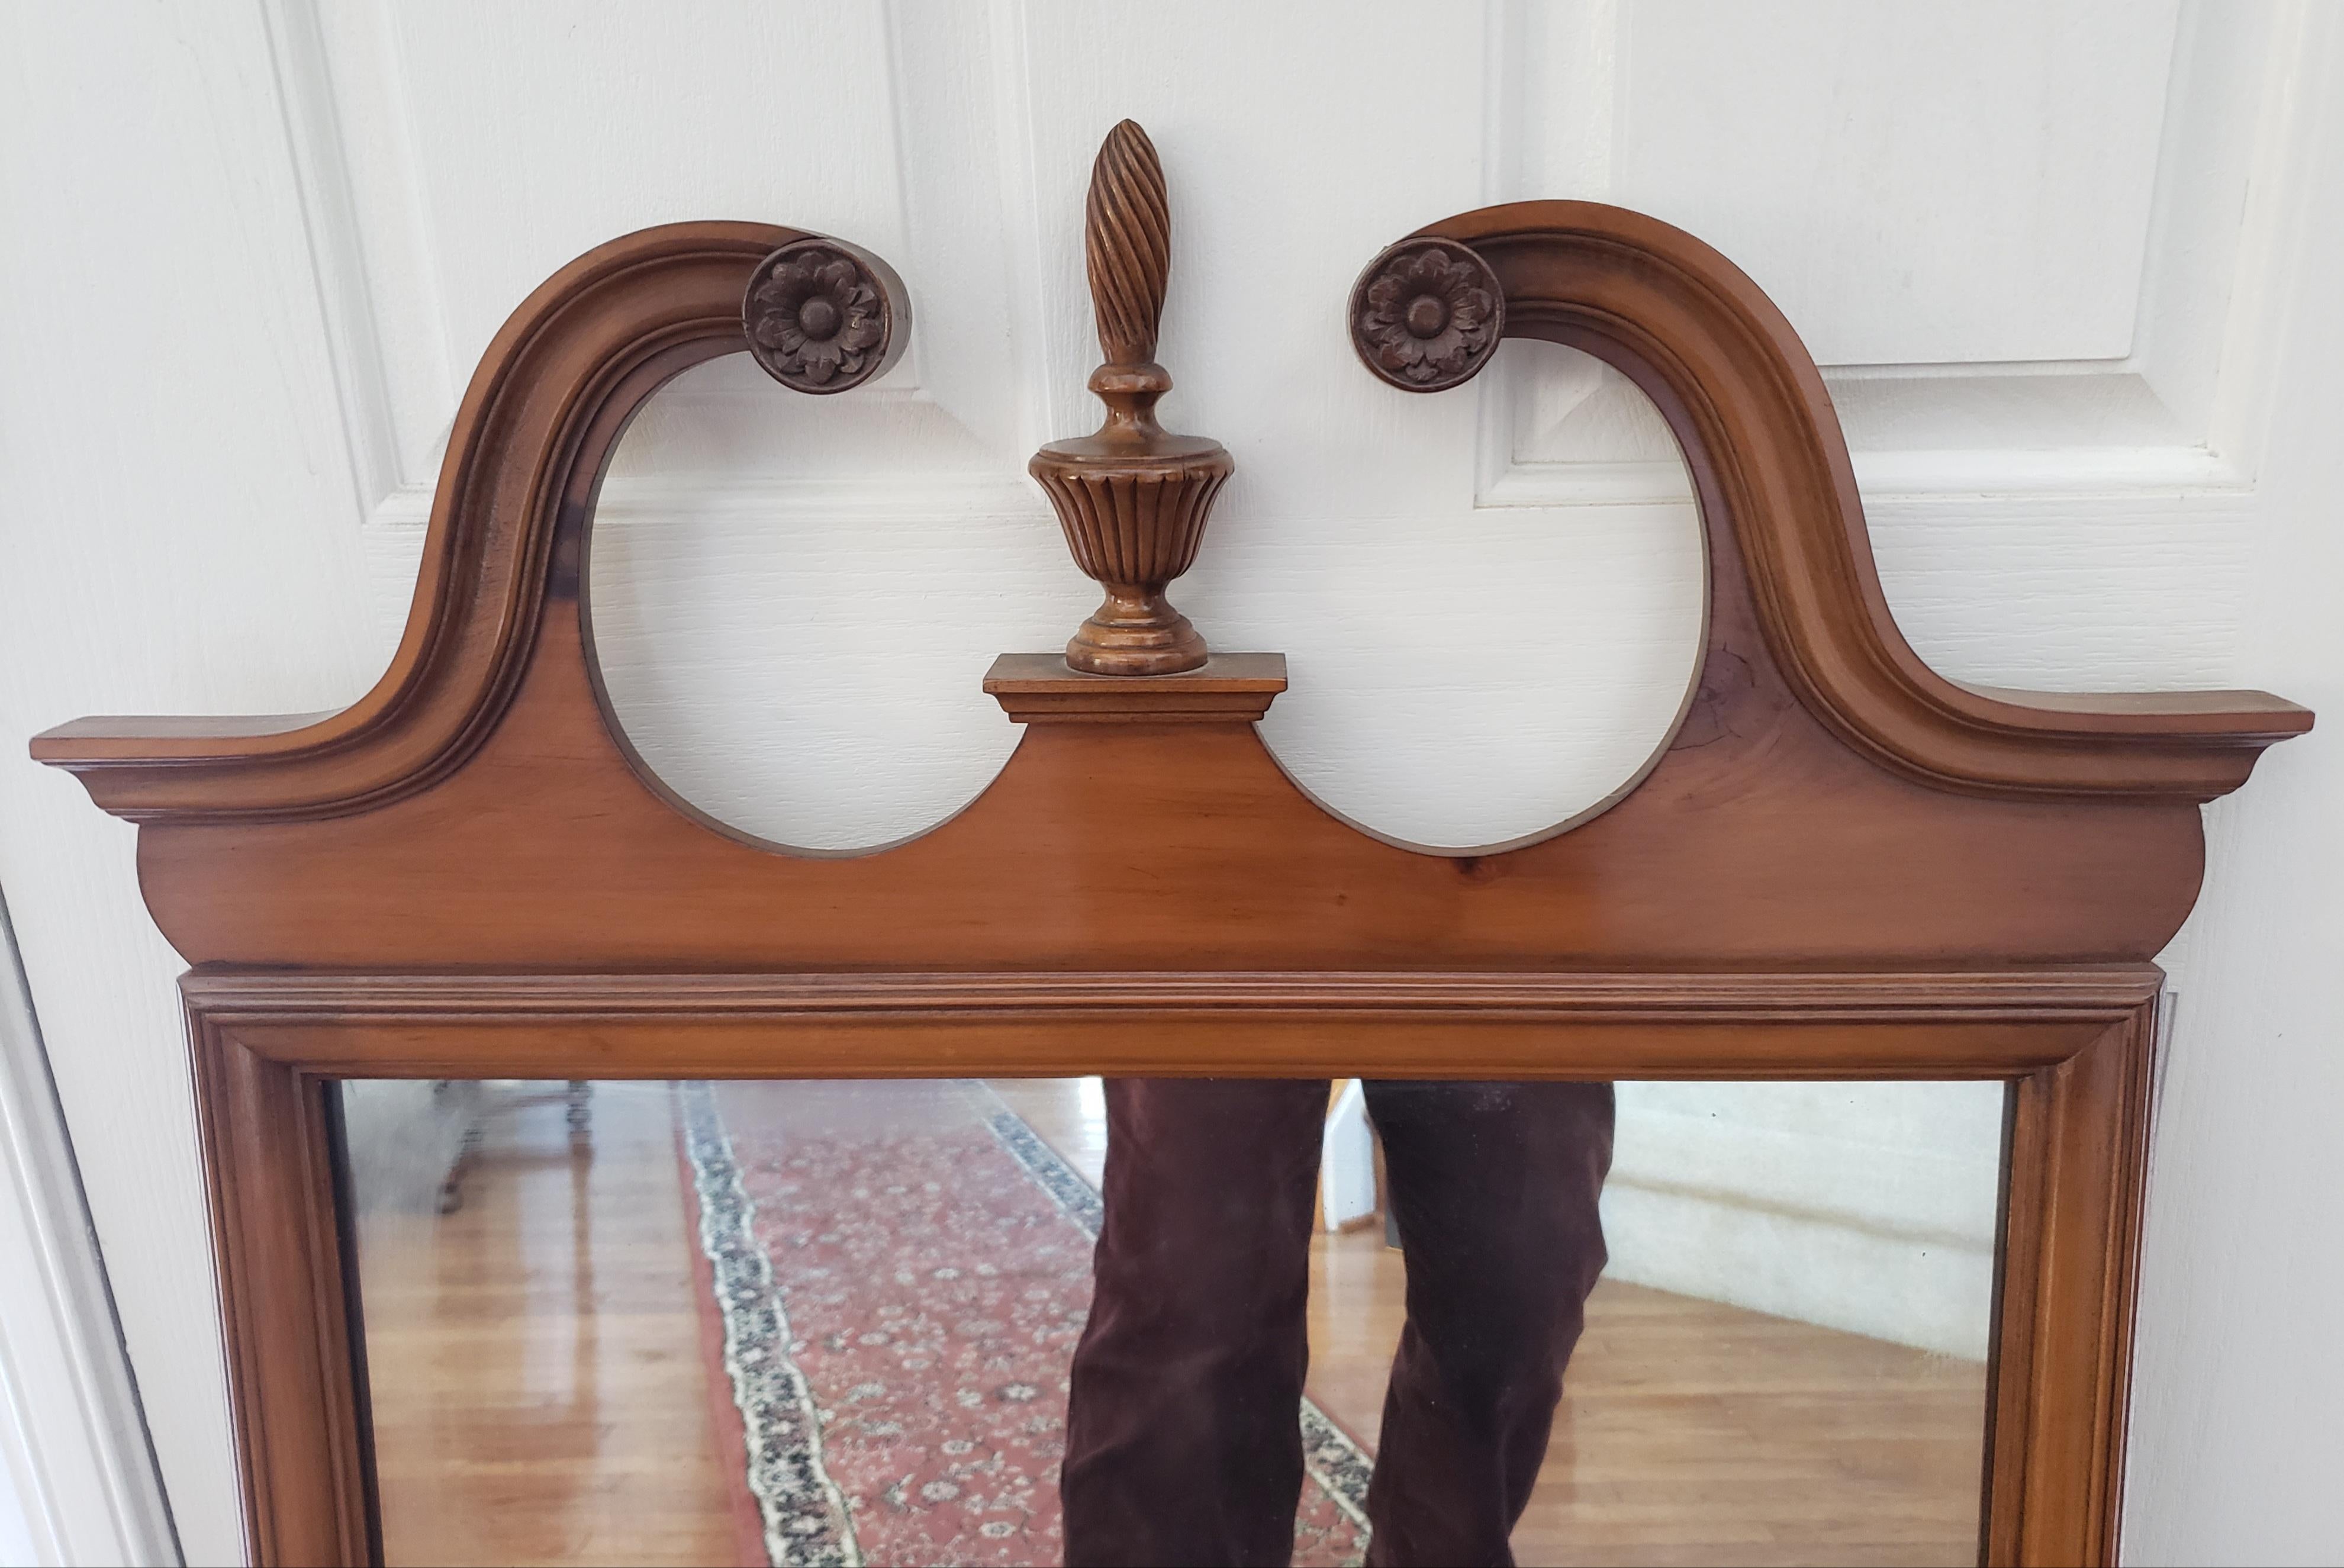 Huntley Thomasville maple Chippendale carved Urn mirror, Circa 1940s. Very good vintage condition. 
Measures 26.5 